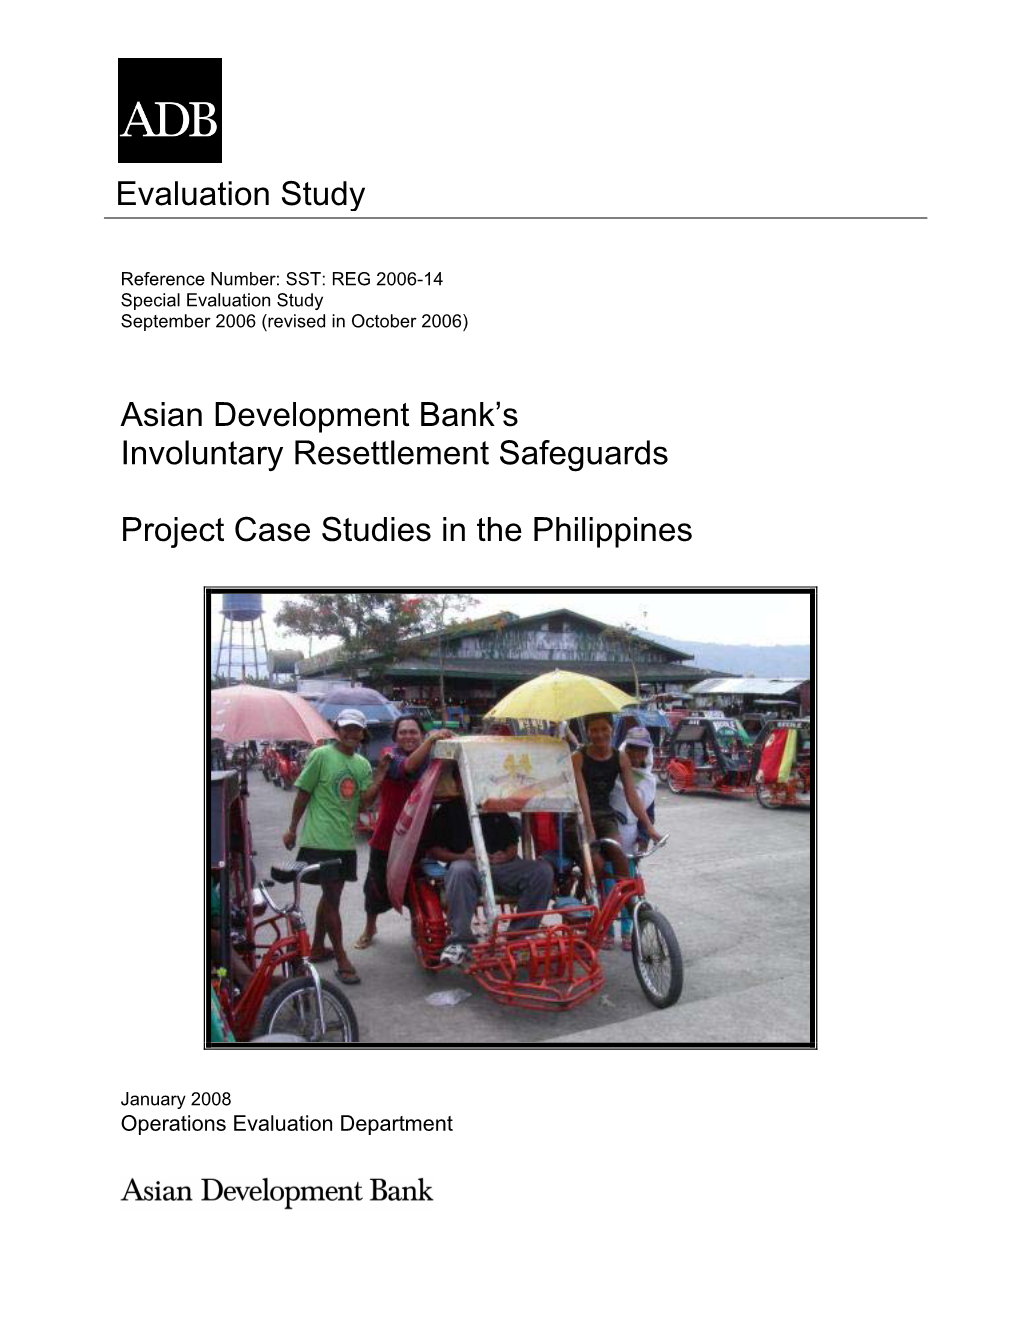 Project Case Studies in the Philippines